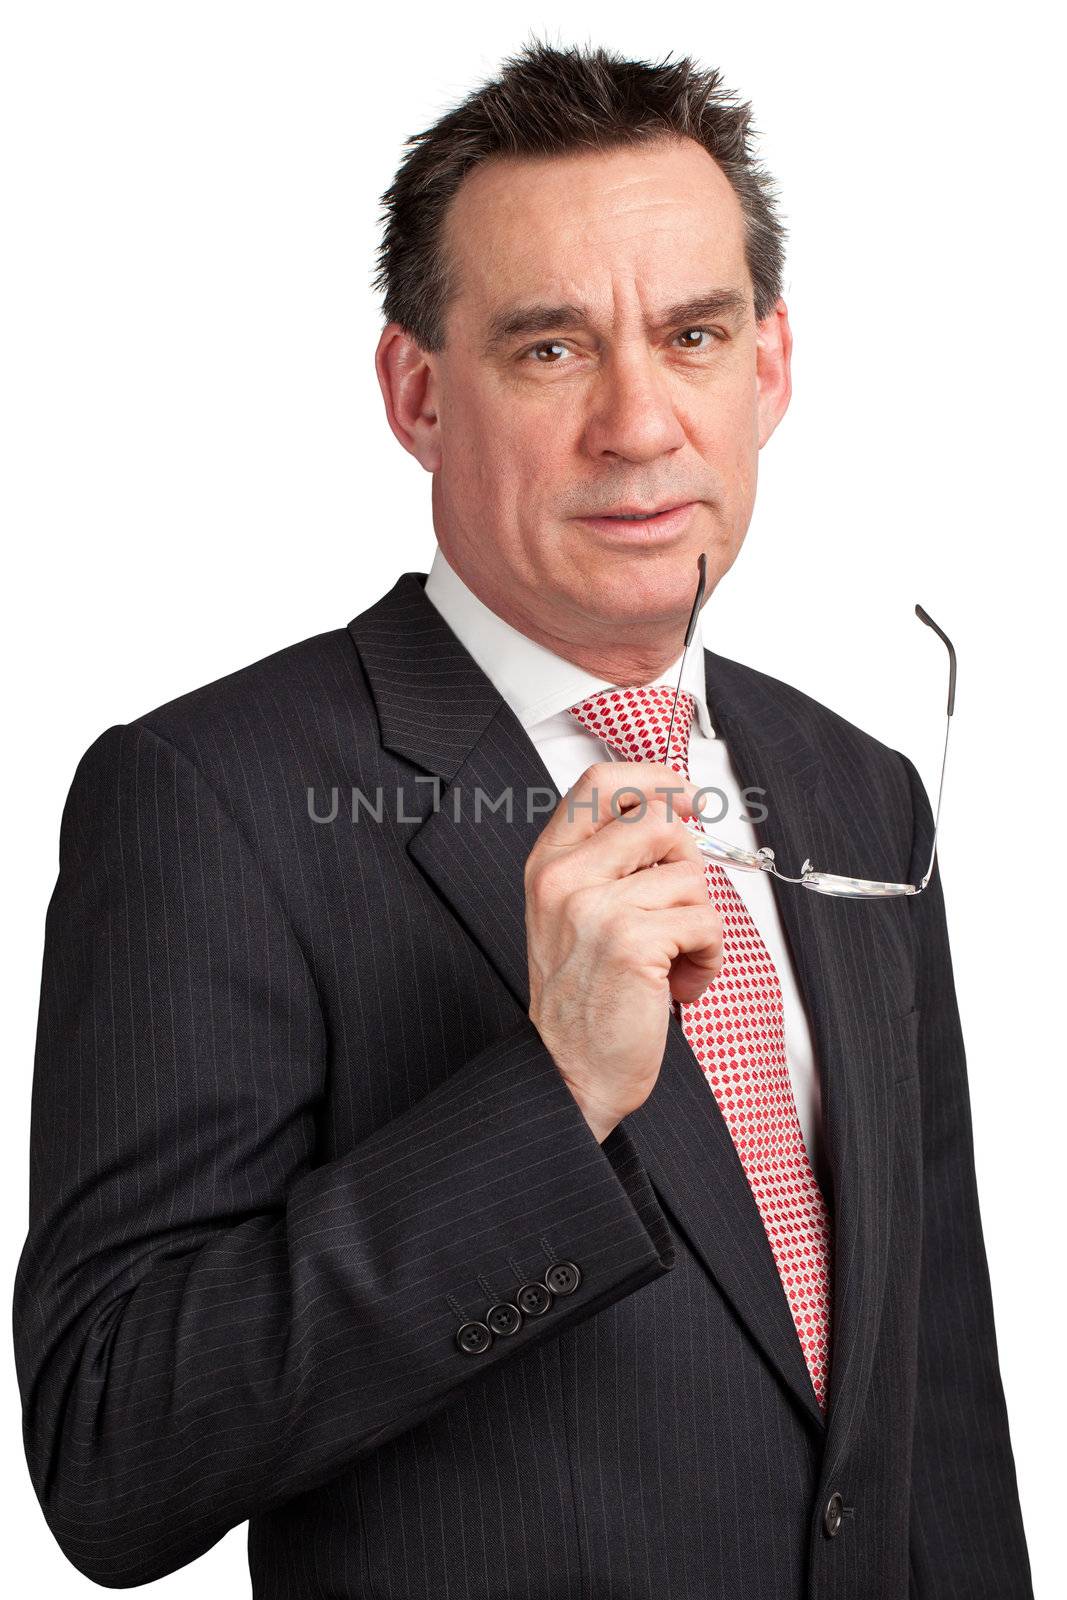 Smiling Business Man in Suit holding glasses by scheriton